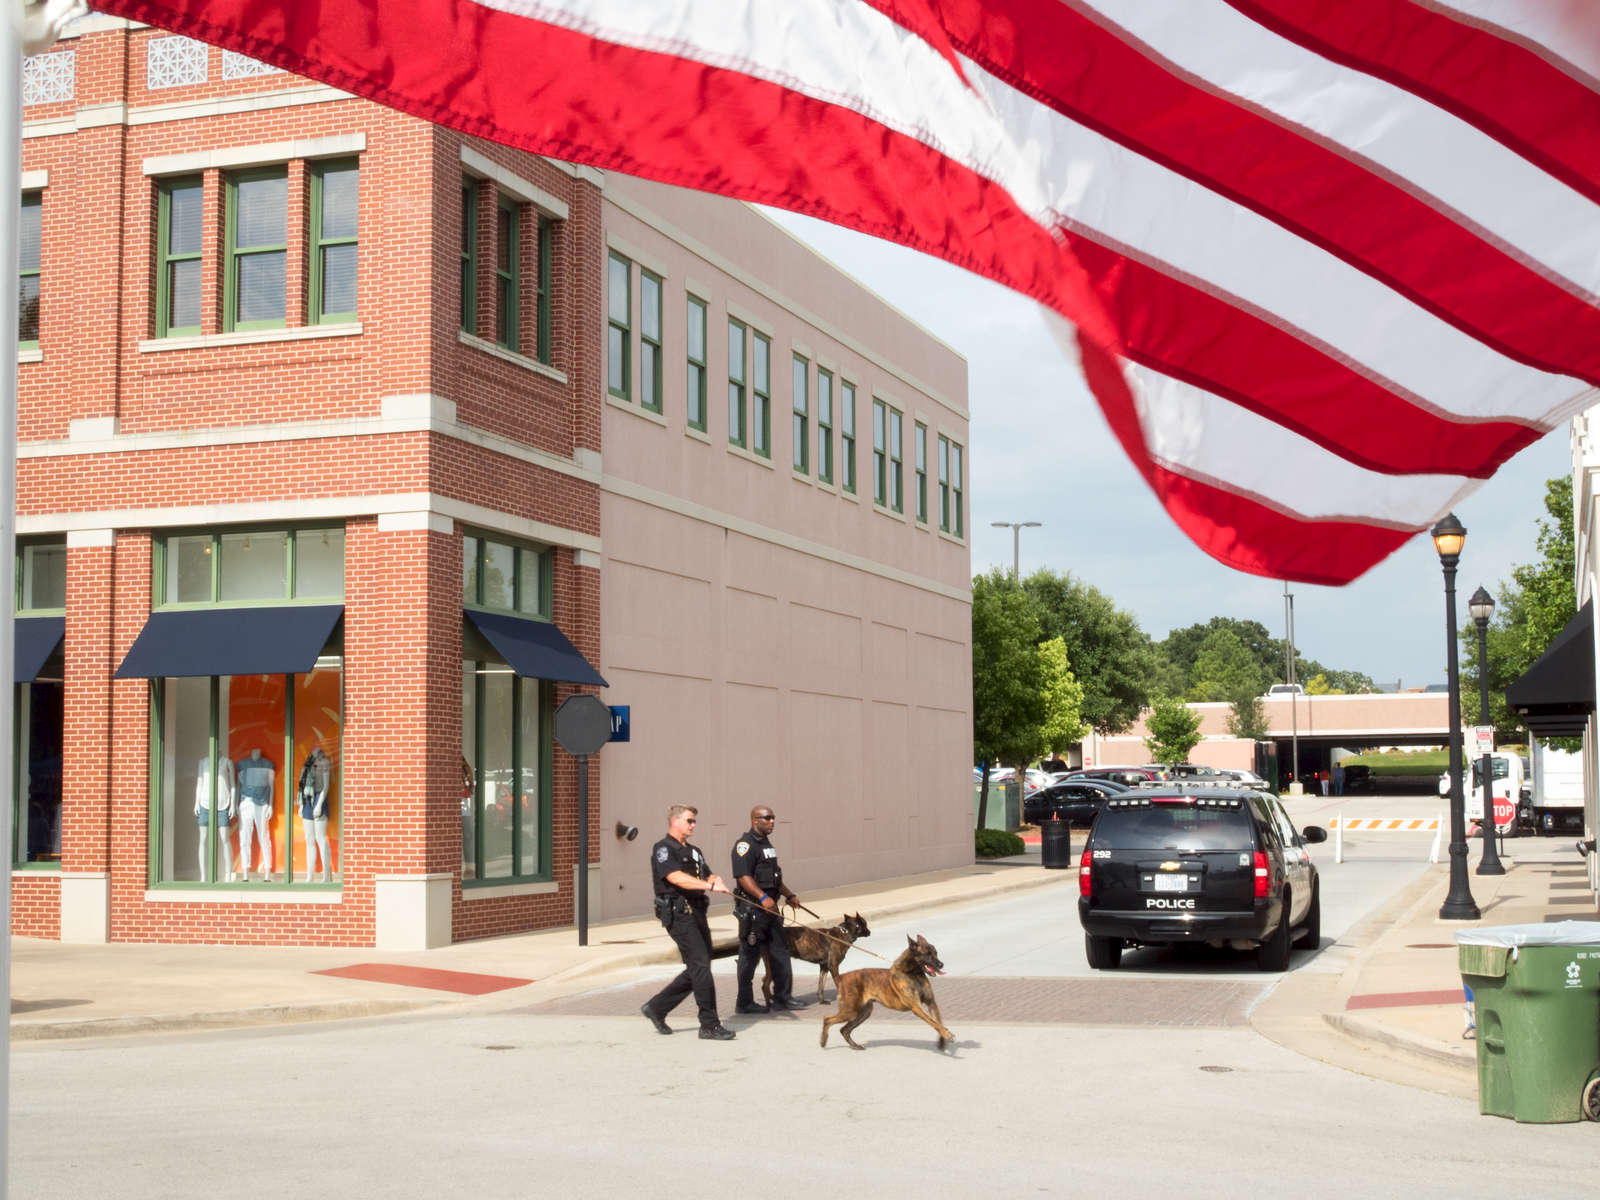 Police officers and dogs from the nearby Dallas Fort Worth airport, search the town of Southlake for explosives ahead of the annual Stars & Stripes celebration. Southlake is an affluent city located north-west of Dallas in the U.S state of Texas with a population of arond 26,5700. Southlake was named in 2014 as one of TIME magazines top 10 richest towns in America a and is known for public schools, Southlake Town Square, its wealth, Gateway Church and Carroll High School's 8-time state champion football team.Dallas is a major city in Texas and is the largest urban center of the fourth most populous metropolitan area in the United States. The city ranks ninth in the U.S. and third in Texas after Houston and San Antonio. The city's prominence arose from its historical importance as a center for the oil and cotton industries, and its position along numerous railroad lines.For two weeks in the summer of 2015, photographer Peter Dench visited Dallas to document the metroplex in his epic reportage, DENCH DOES DALLAS.Photographed using an Olympus E-M5 Mark II©Peter Dench/Getty Images Reportage